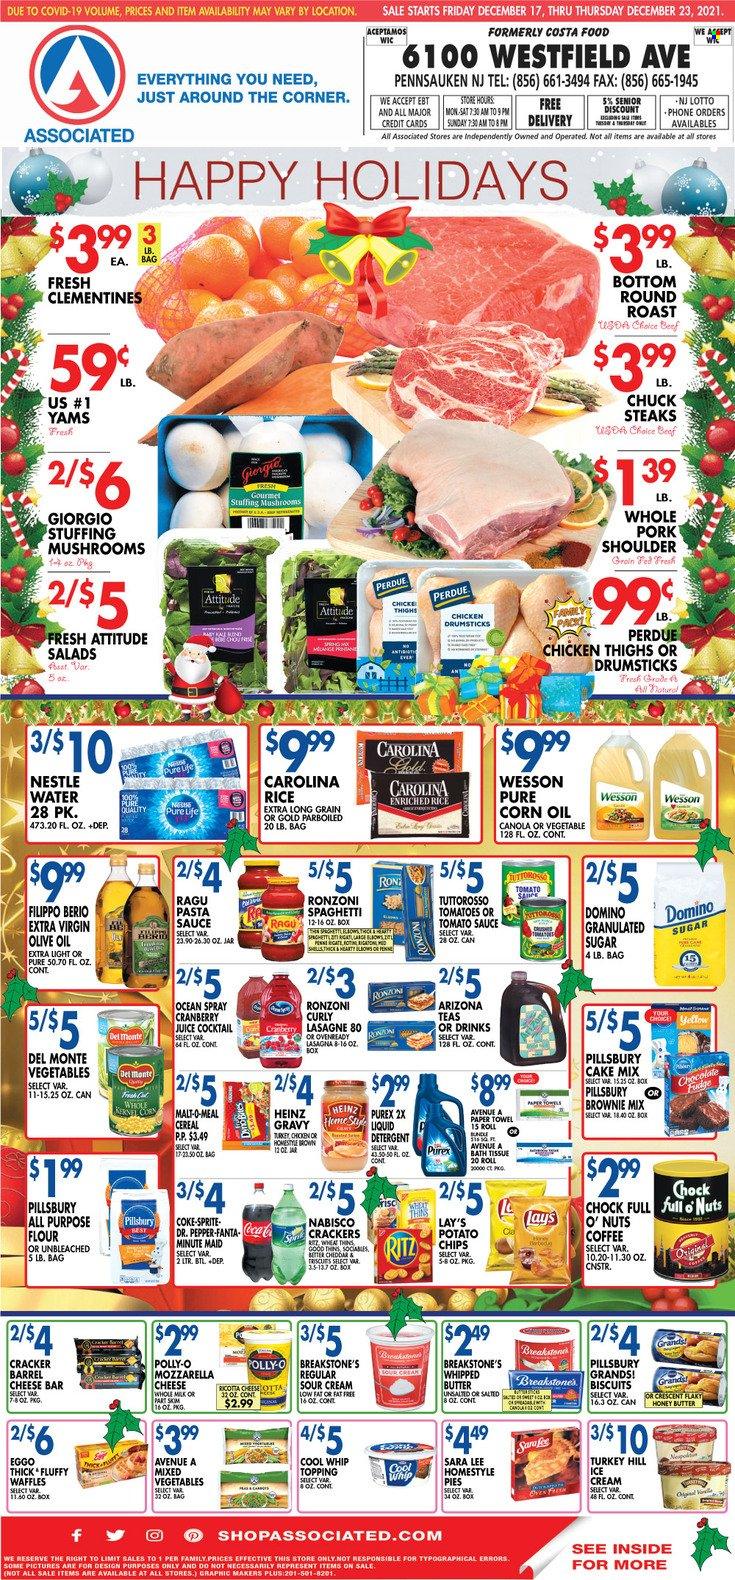 thumbnail - Associated Supermarkets Flyer - 12/17/2021 - 12/23/2021 - Sales products - mushrooms, Sara Lee, waffles, brownie mix, cake mix, tomatoes, spaghetti, pasta, sauce, Pillsbury, Perdue®, ragú pasta, mozzarella, cheese, milk, whipped butter, Cool Whip, sour cream, ice cream, mixed vegetables, fudge, Nestlé, crackers, biscuit, chips, Lay’s, all purpose flour, flour, granulated sugar, sugar, topping, tomato sauce, Heinz, cereals, rice, parboiled rice, penne, ragu, corn oil, extra virgin olive oil, olive oil, honey, Coca-Cola, cranberry juice, Sprite, juice, Fanta, Dr. Pepper, AriZona, fruit punch, coffee, chicken thighs, chicken drumsticks, beef meat, steak, round roast, pork meat, pork shoulder, bath tissue, paper towels, detergent, Purex, clementines. Page 1.